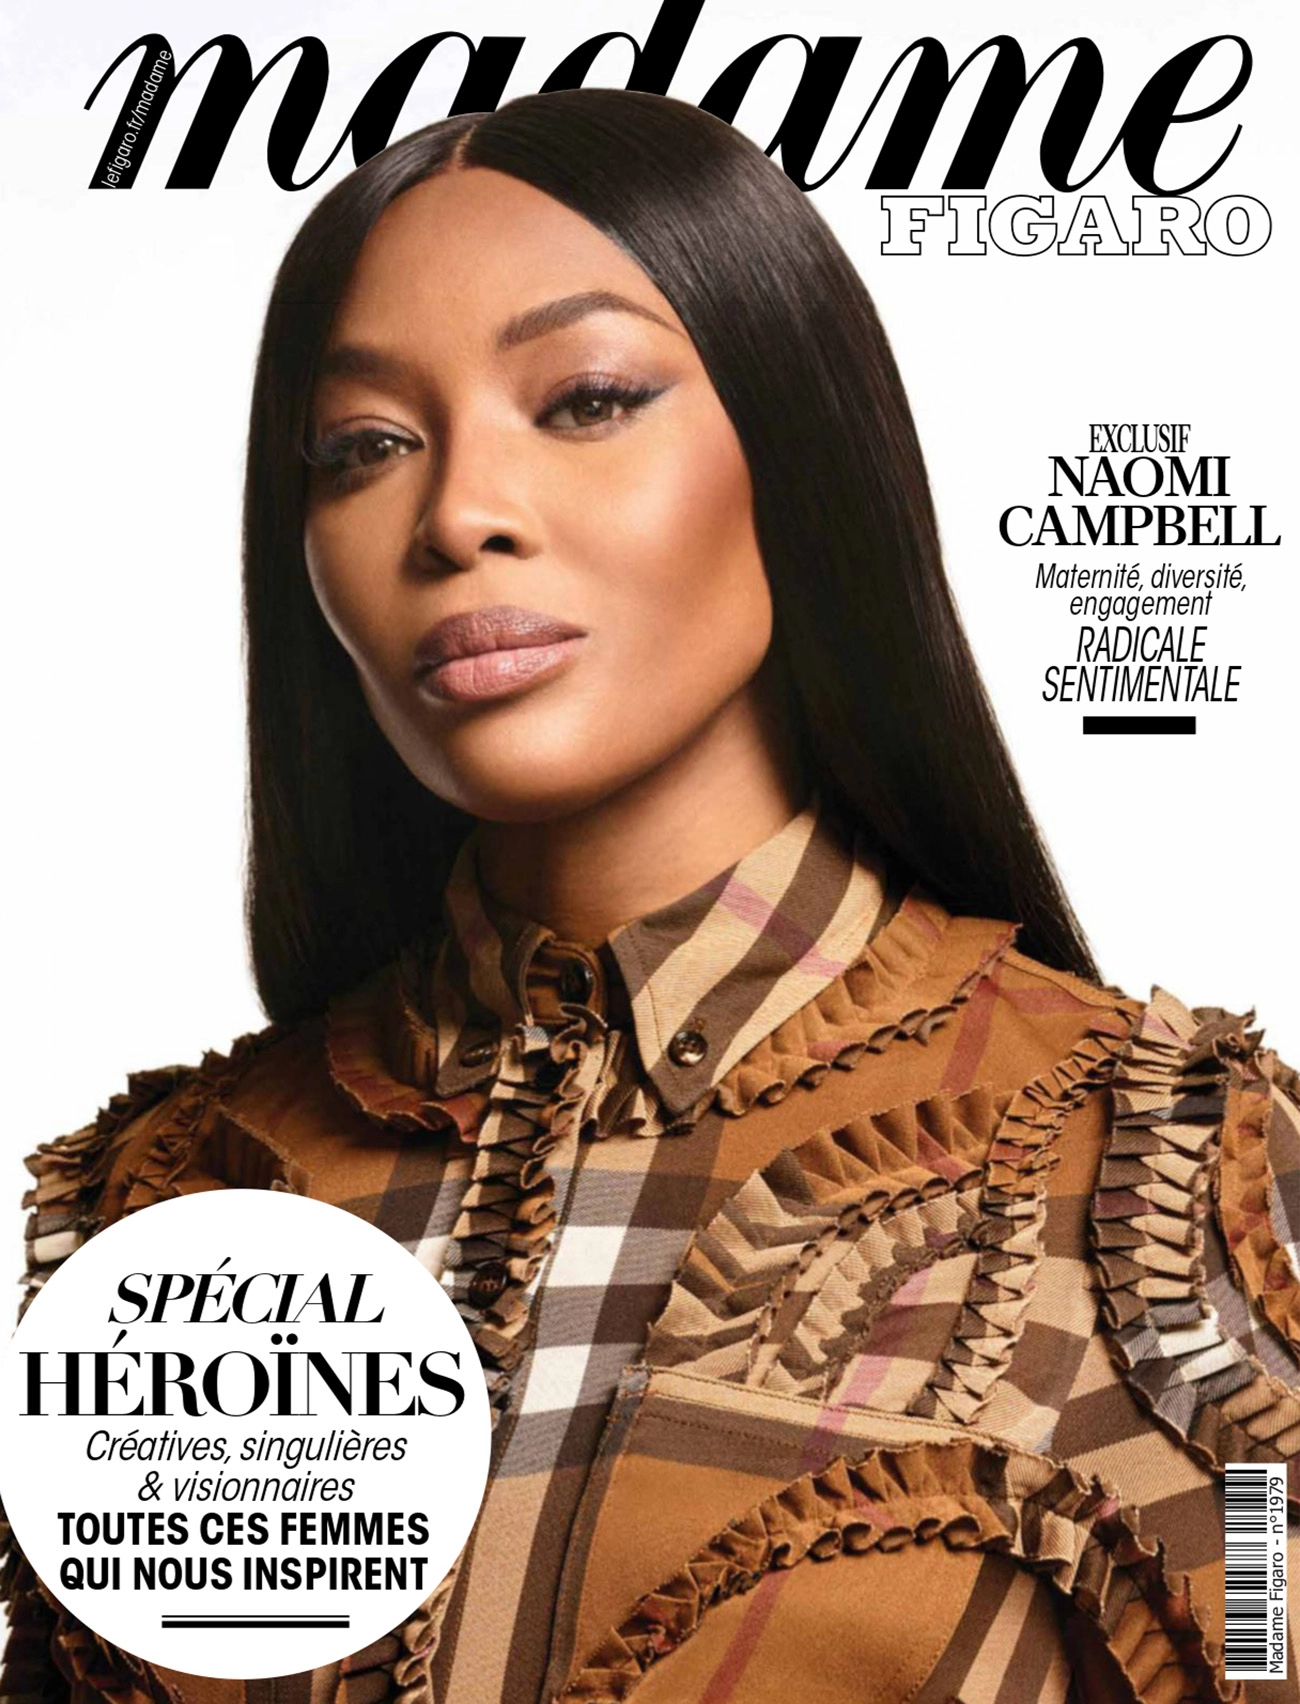 Naomi Campbell covers Madame Figaro July 29th, 2022 by Joseph Degbadjo